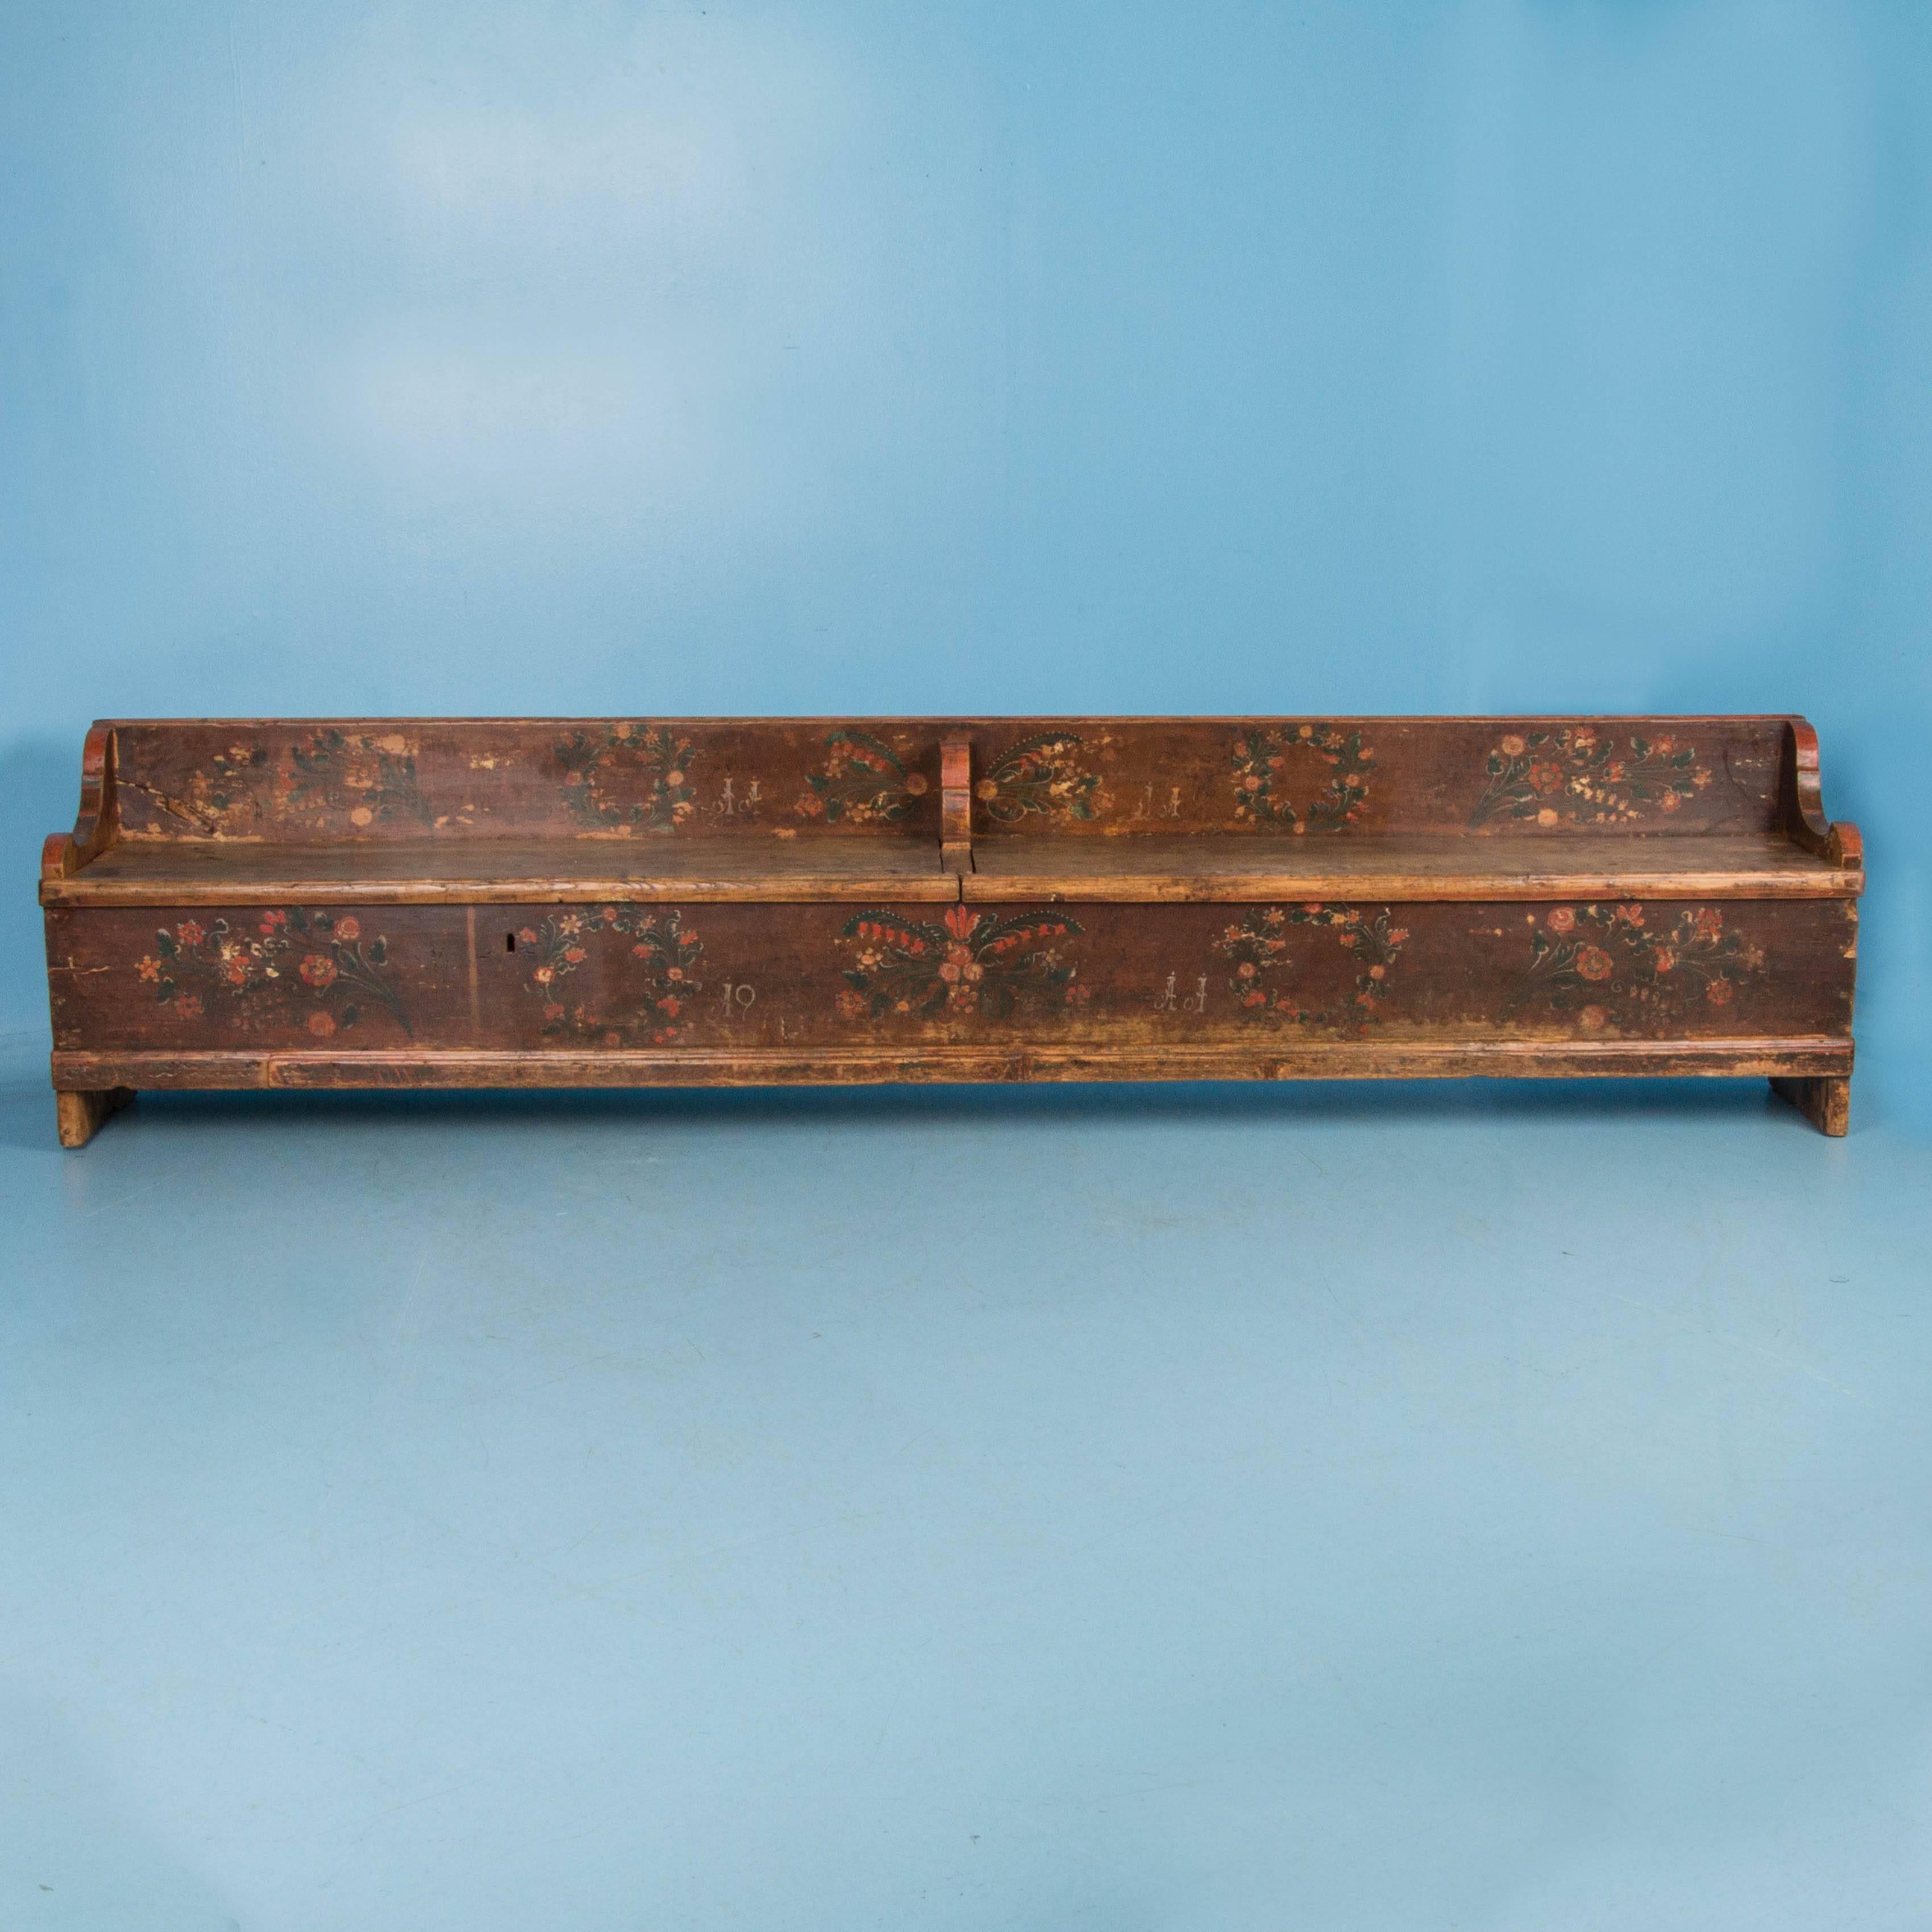 This long antique storage bench from Romania is made of pine and painted with traditional polychrome floral designs over a rich brown base color. Underneath the segregated hinged seats are two large storage compartments. The original painted finish